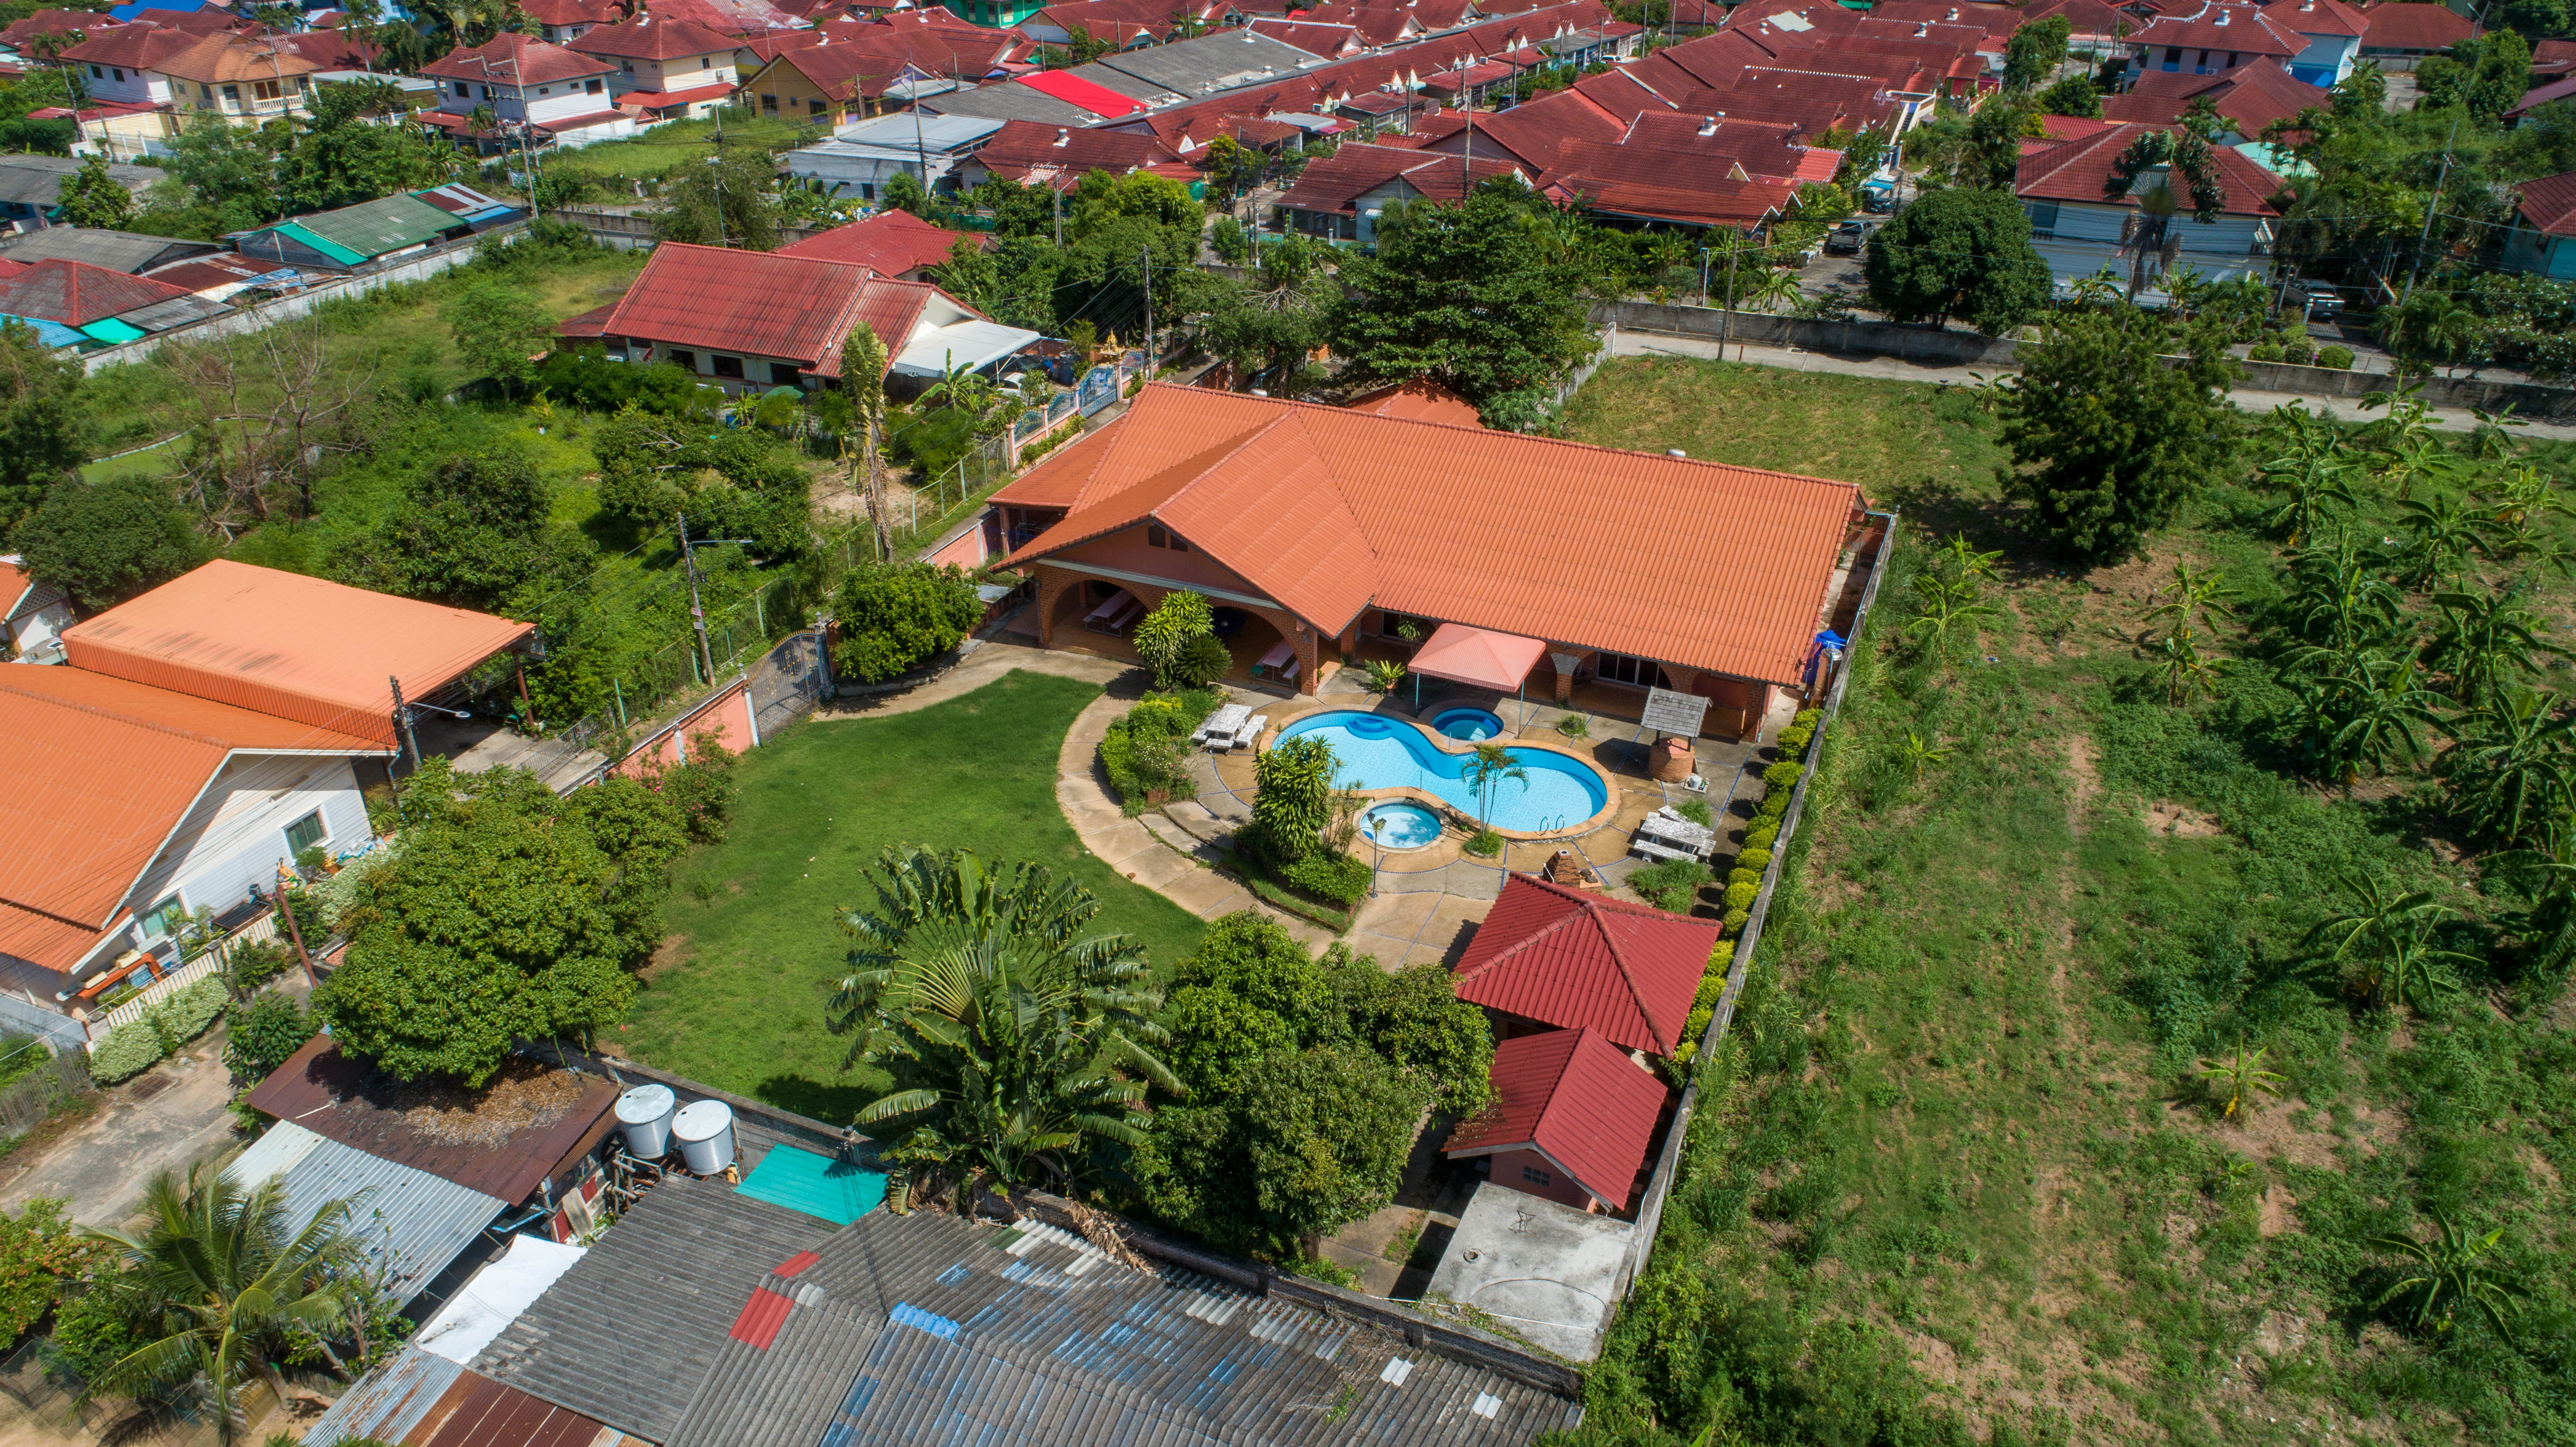 Rare Vintage Roman Style Pool Villa !!! Pool Villa for sale Pattaya with land area 1 rai 1 ngan, Khao Talo 10, Soi Sukjai 7 , shady atmosphere, very private, has a swimming pool, pool table, and a lot of banquet space . Fully decorated !!!.